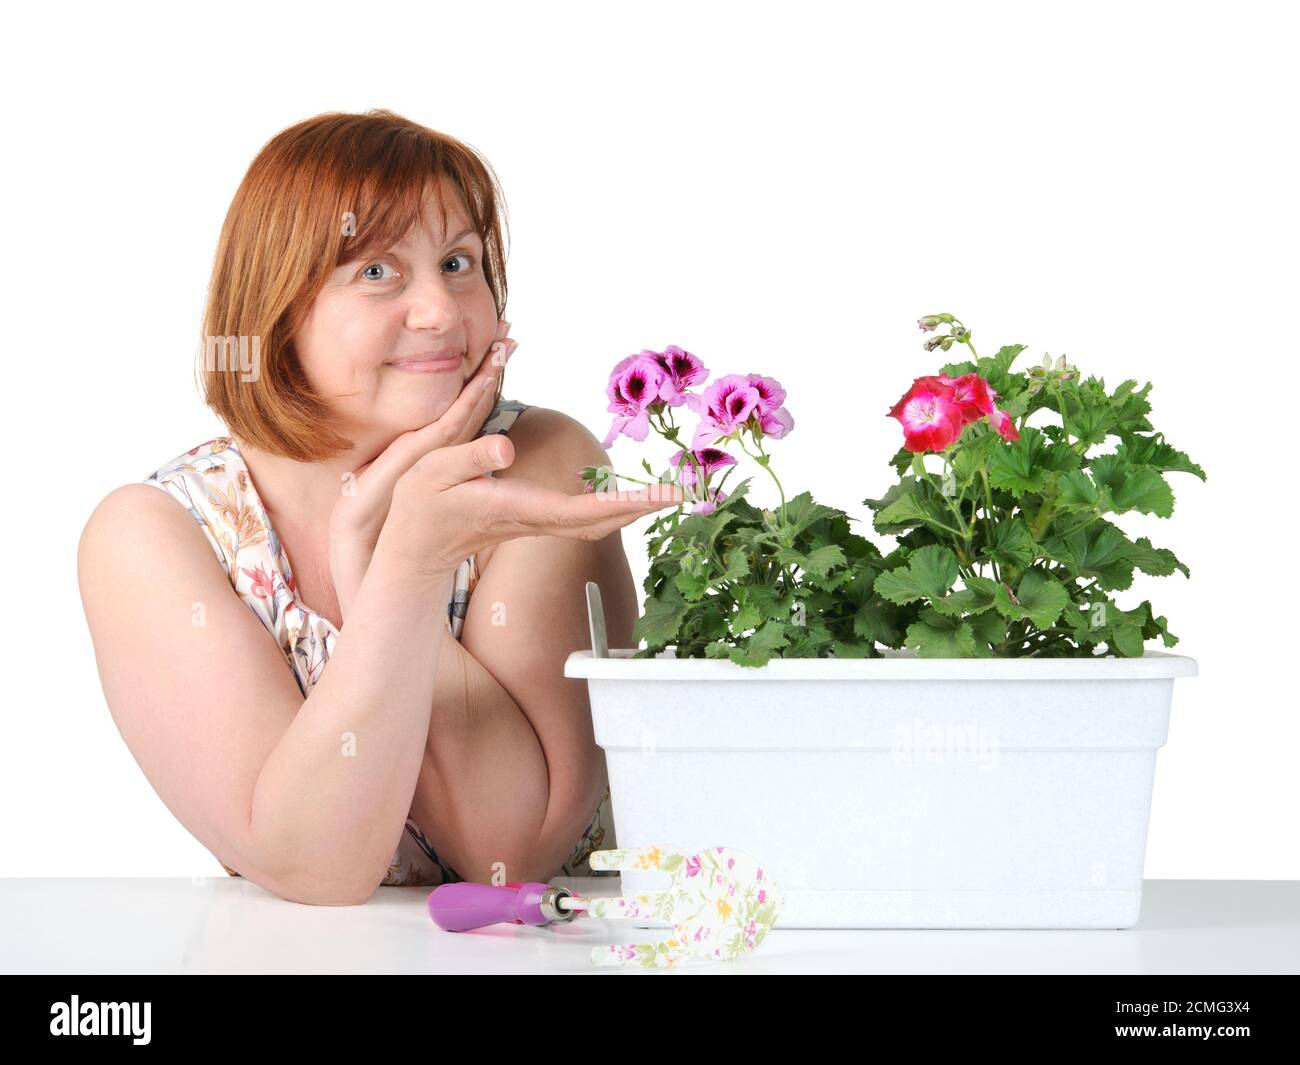 Portrait of a middle-aged woman showing a houseplant. Stock Photo